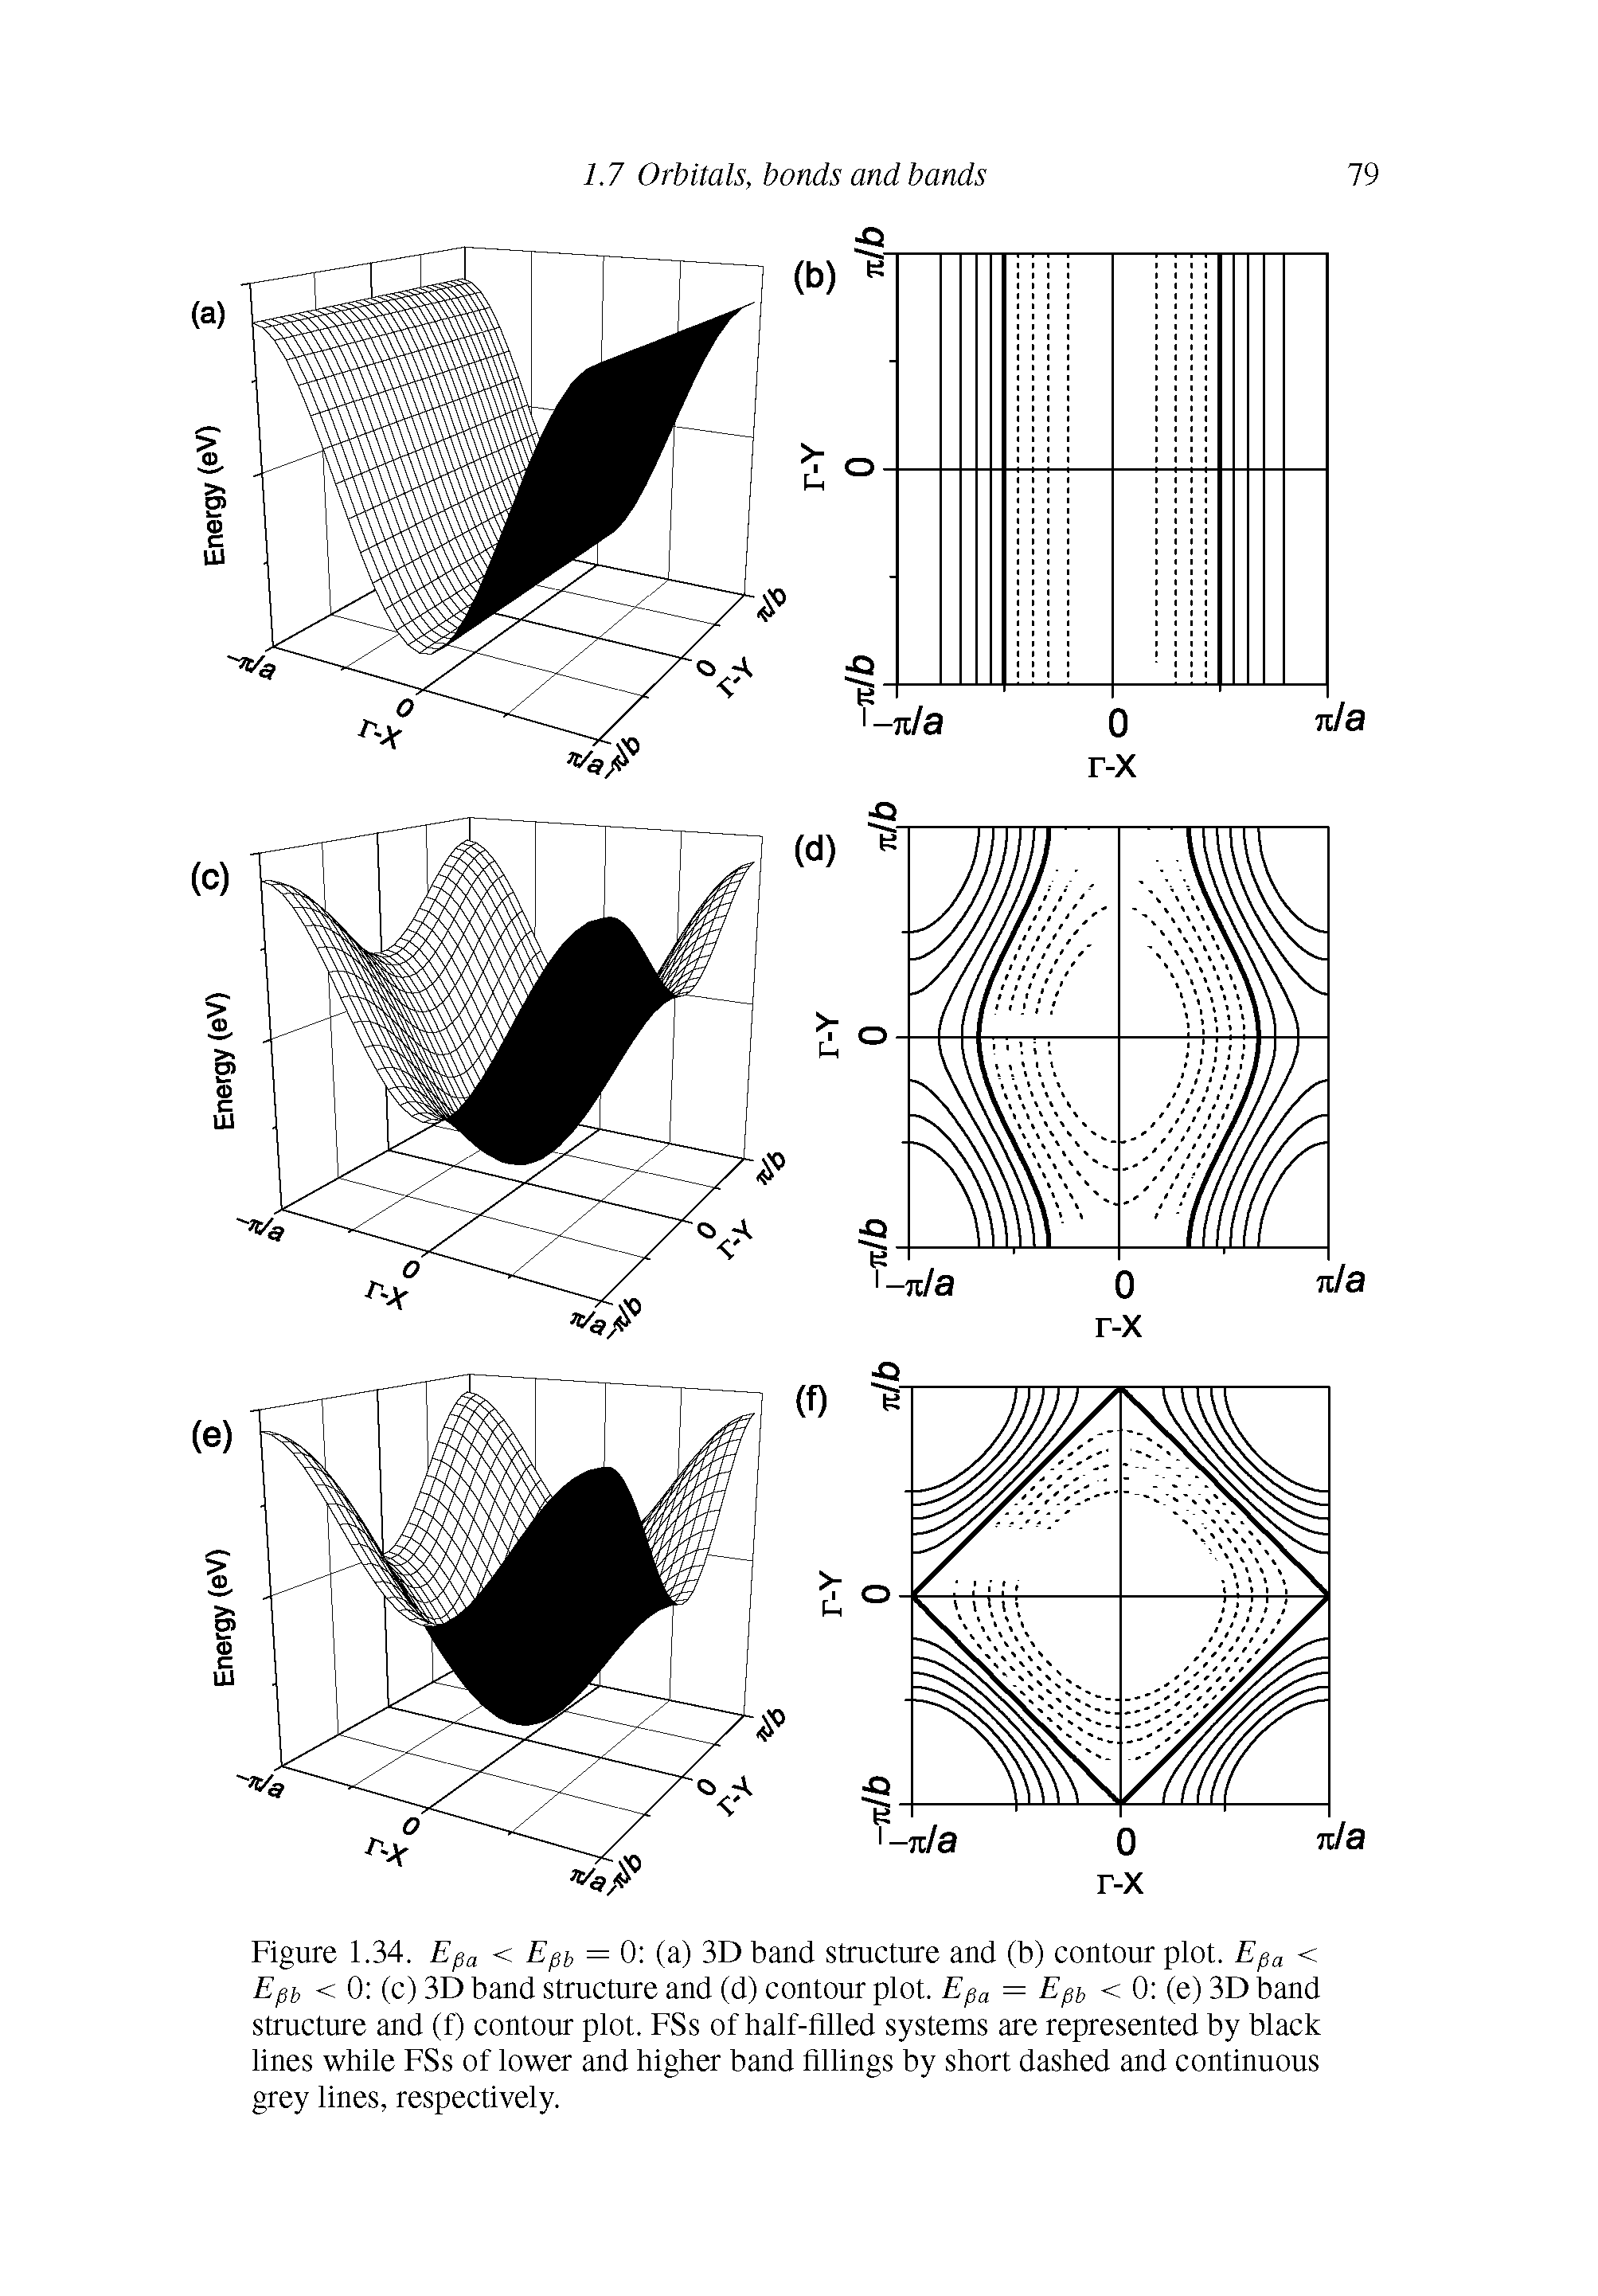 Figure 1.34. E a < Epi, = 0 (a) 3D band structure and (b) contour plot. E a < Epb < 0 (c) 3D band structure and (d) contour plot. E a = E t < 0 (e) 3D band structure and (f) contour plot. FSs of half-tilled systems are represented by black lines while FSs of lower and higher band fillings by short dashed and continuous grey lines, respectively.